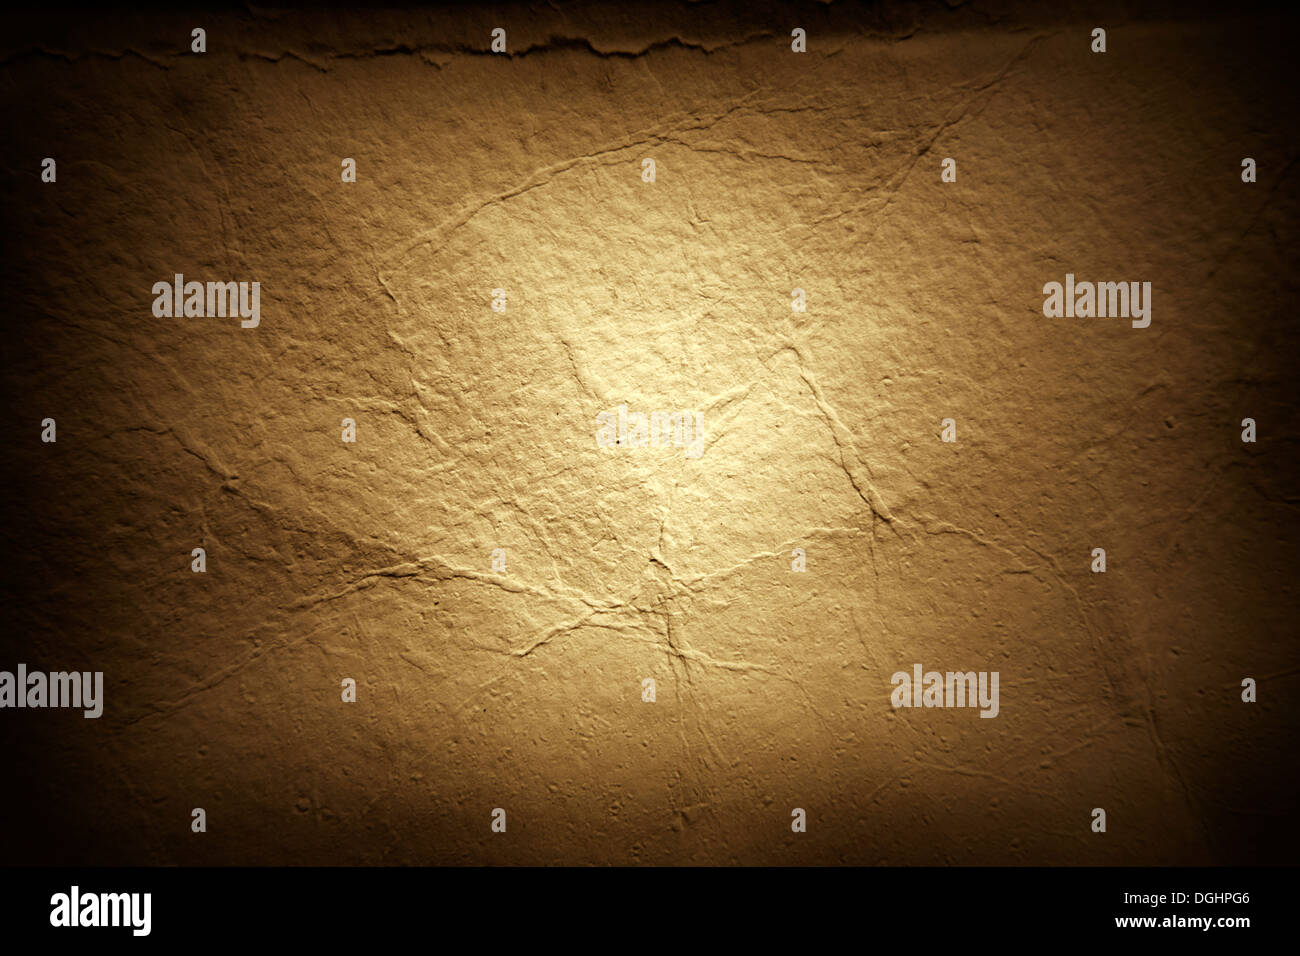 Brown paper texture grunge background Banque D'Images